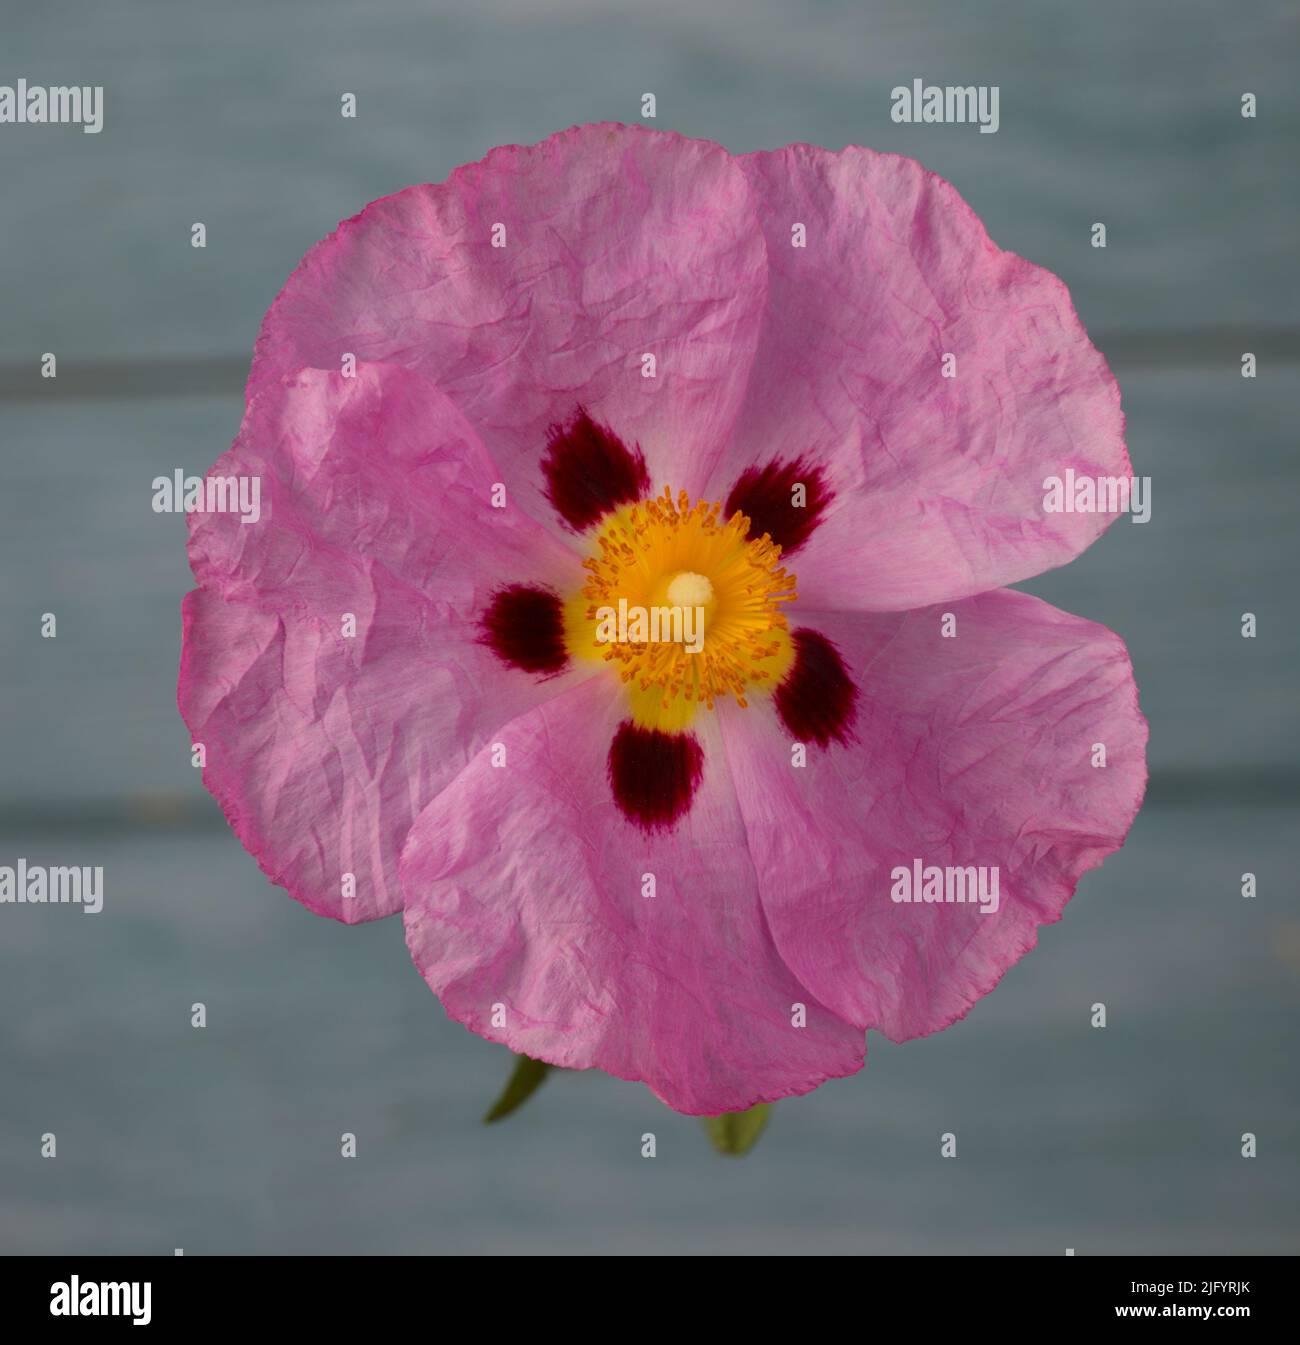 Pink flower of Cistus family Cistaceae or Rock Rose blossom isolated on gray background Stock Photo